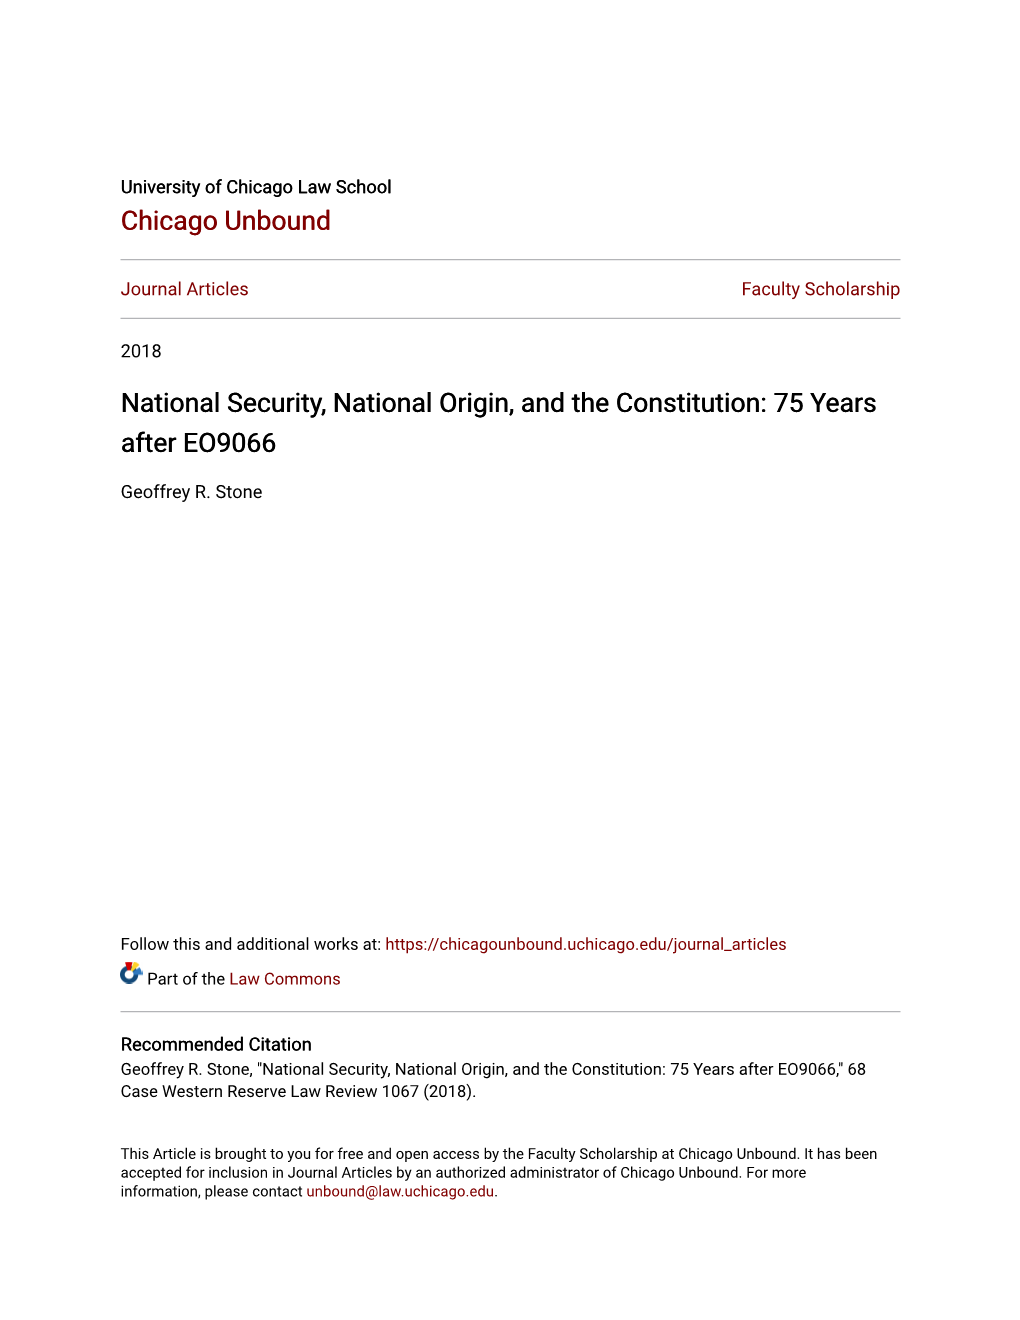 National Security, National Origin, and the Constitution: 75 Years After EO9066